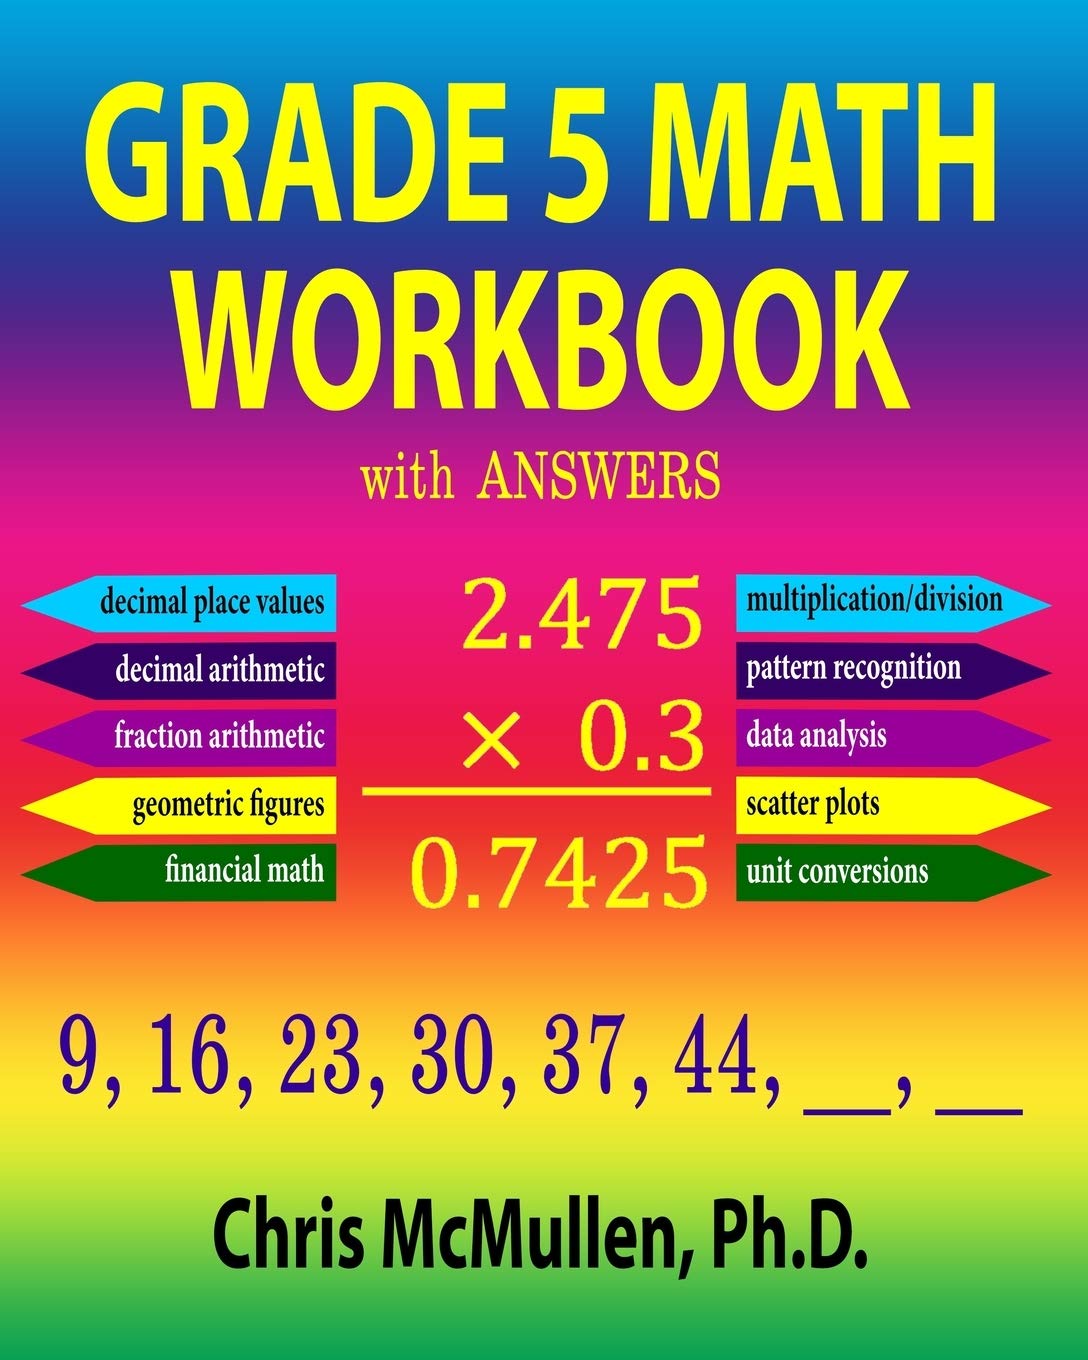 grade-5-math-workbook-with-answers-improve-your-math-fluency